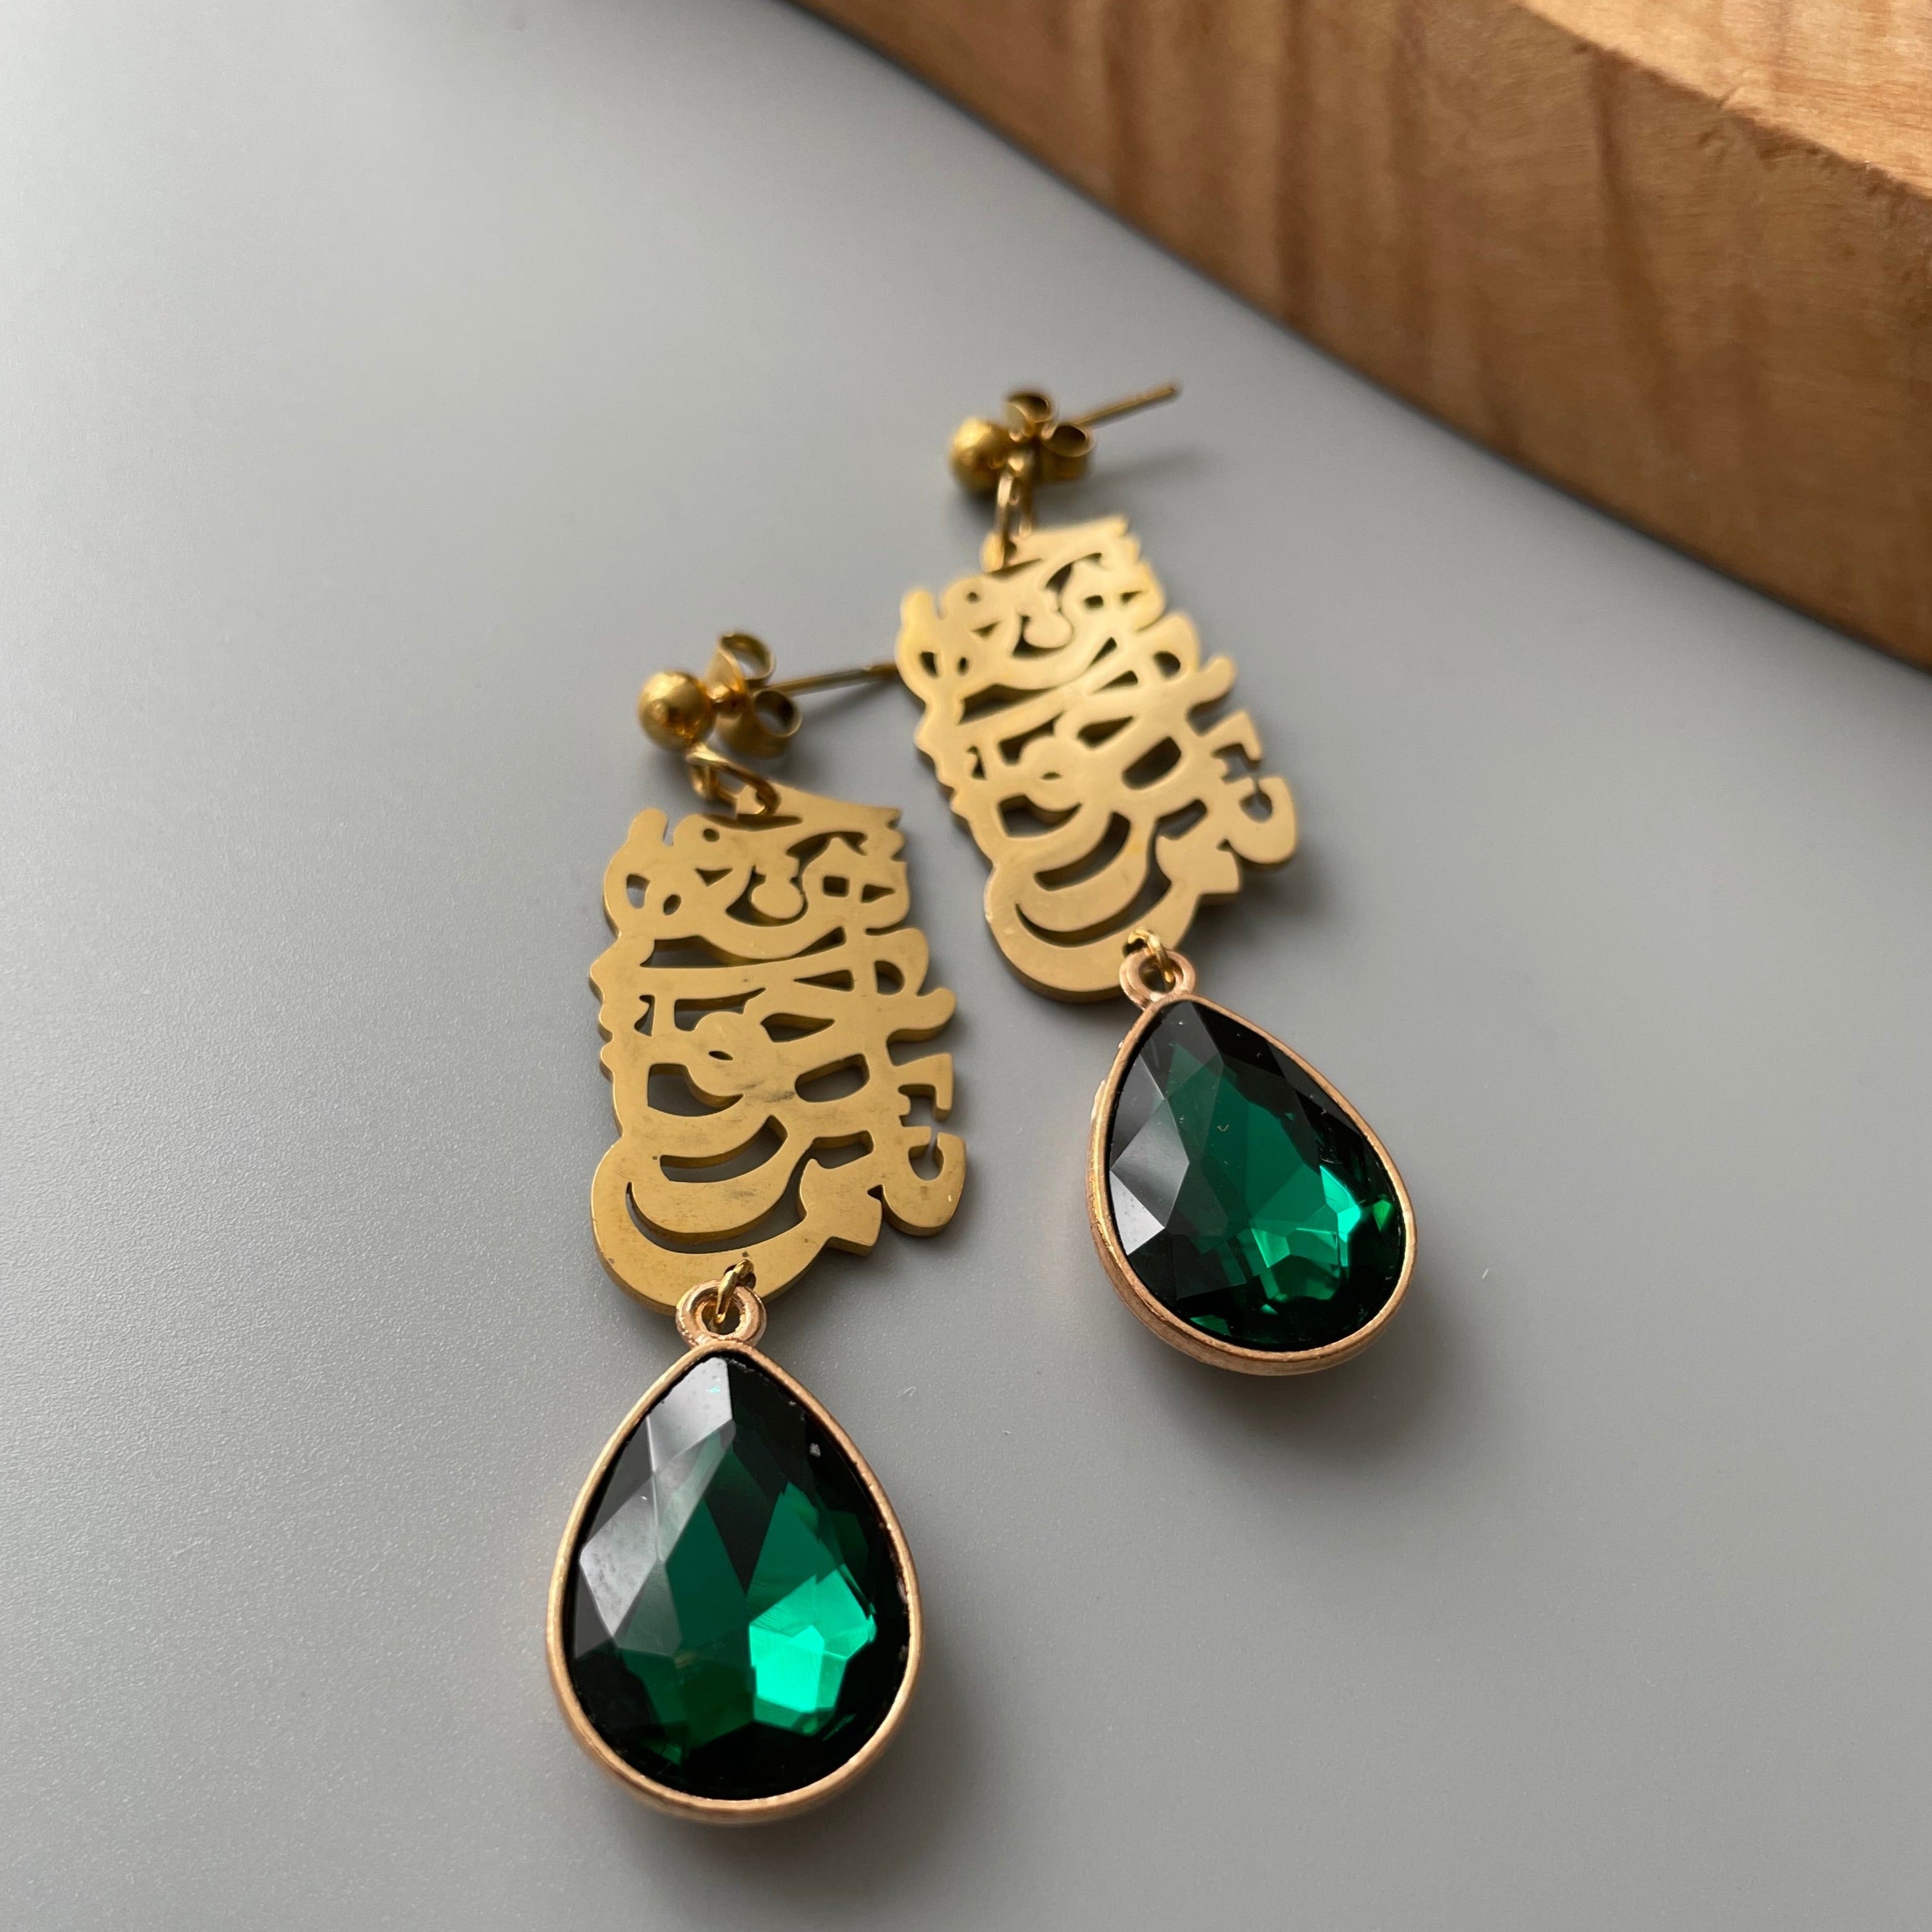 Persian Earrings-Persian Earring with Druzy Stone and Khayyam Poetry:Persian Jewelry-AFRA ART GALLERY